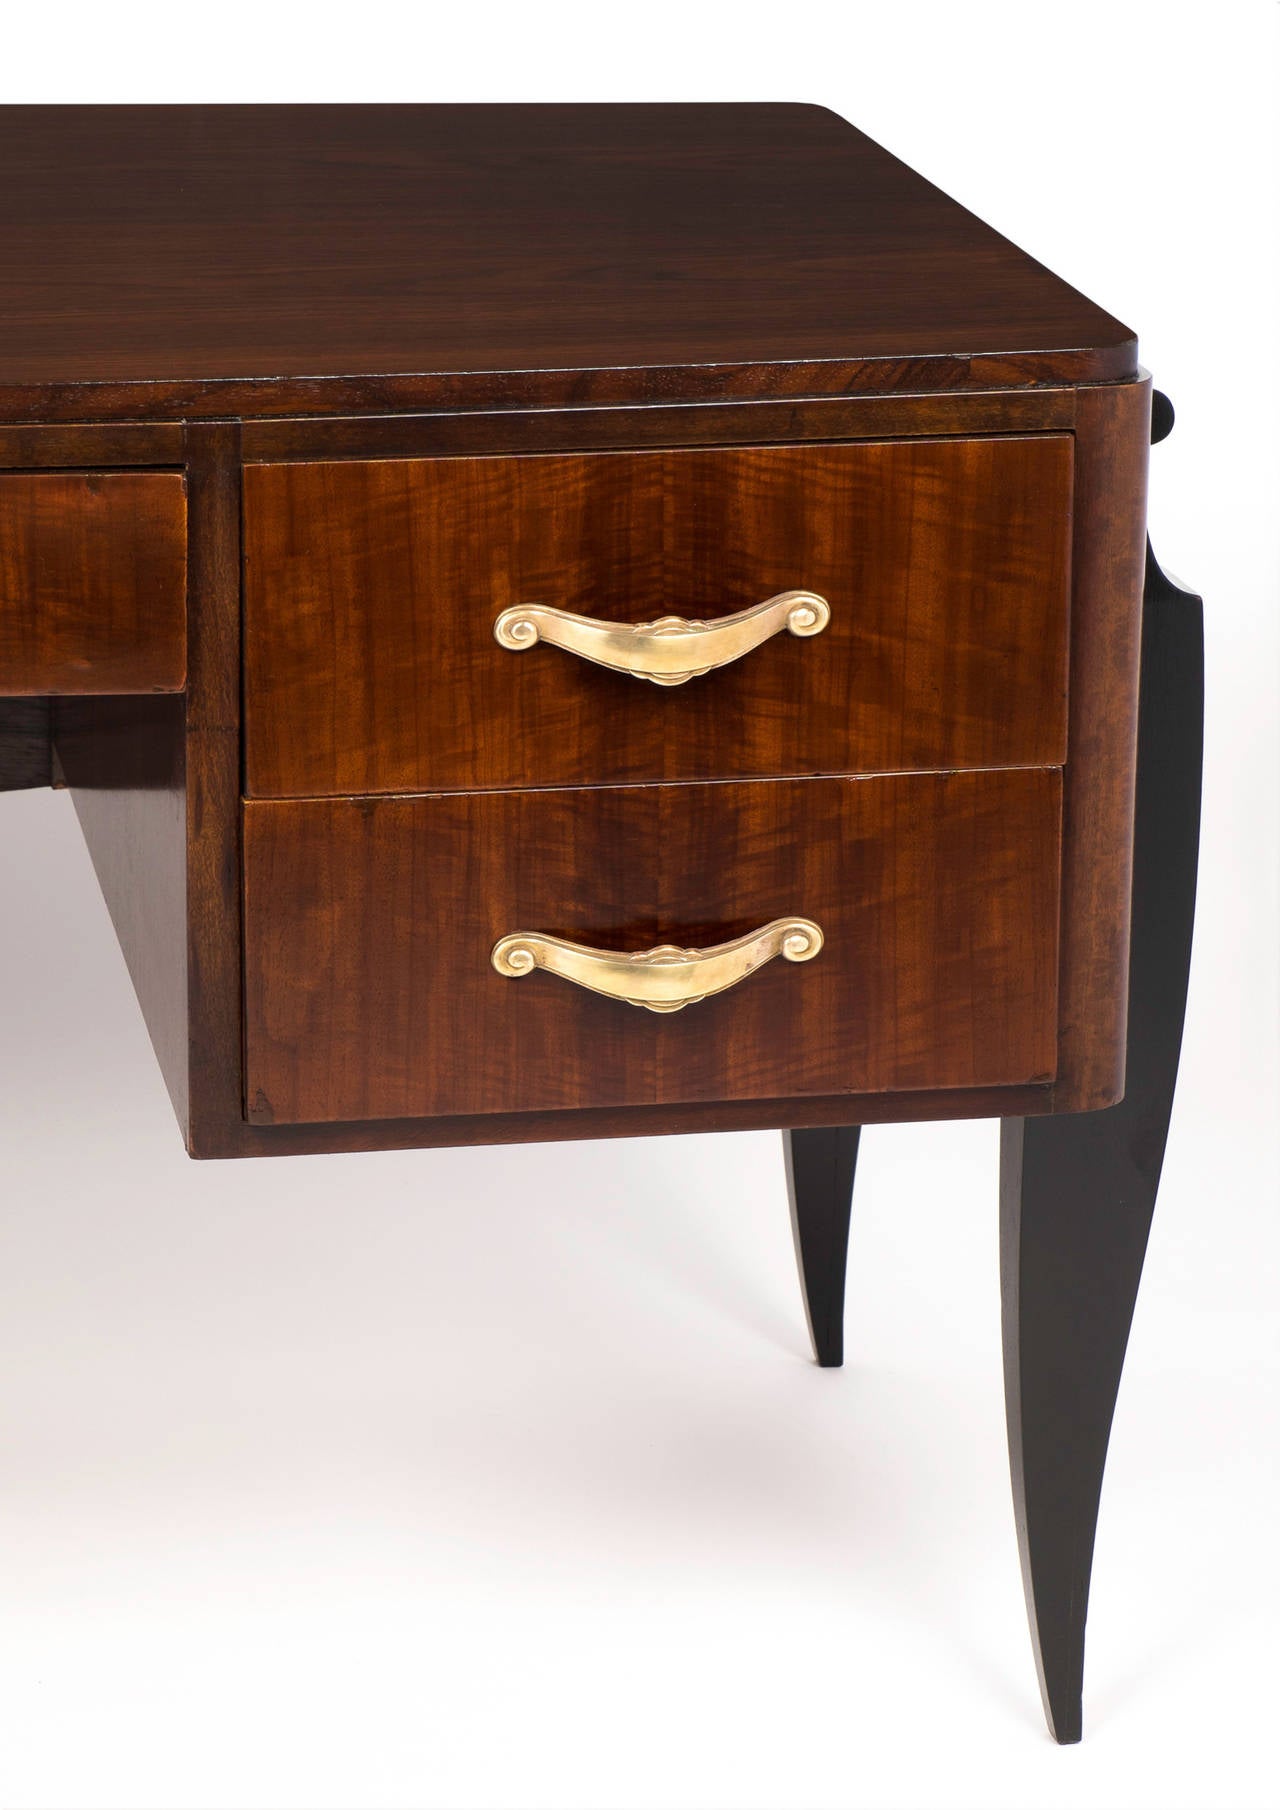 French Art Deco Period Rosewood Desk 1